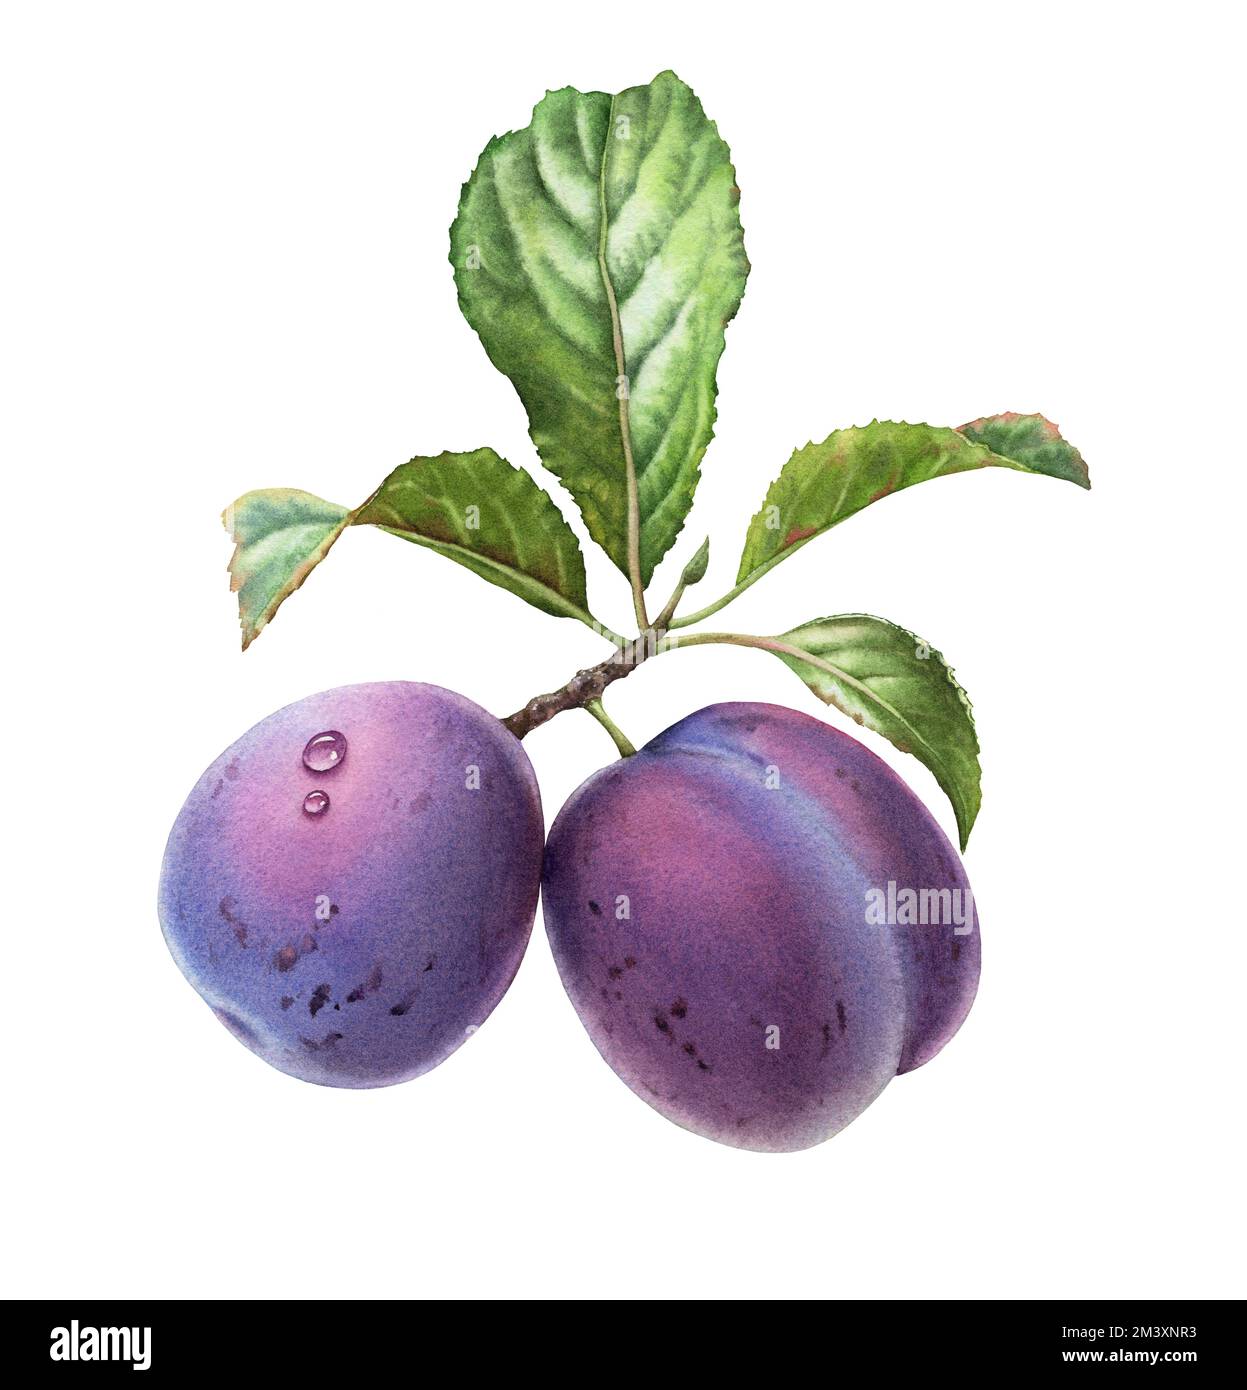 Watercolor plum fruits. Realistic branch with purple whole fruits and green leaves. Botanical hand drawn illustration for food label design Stock Photo